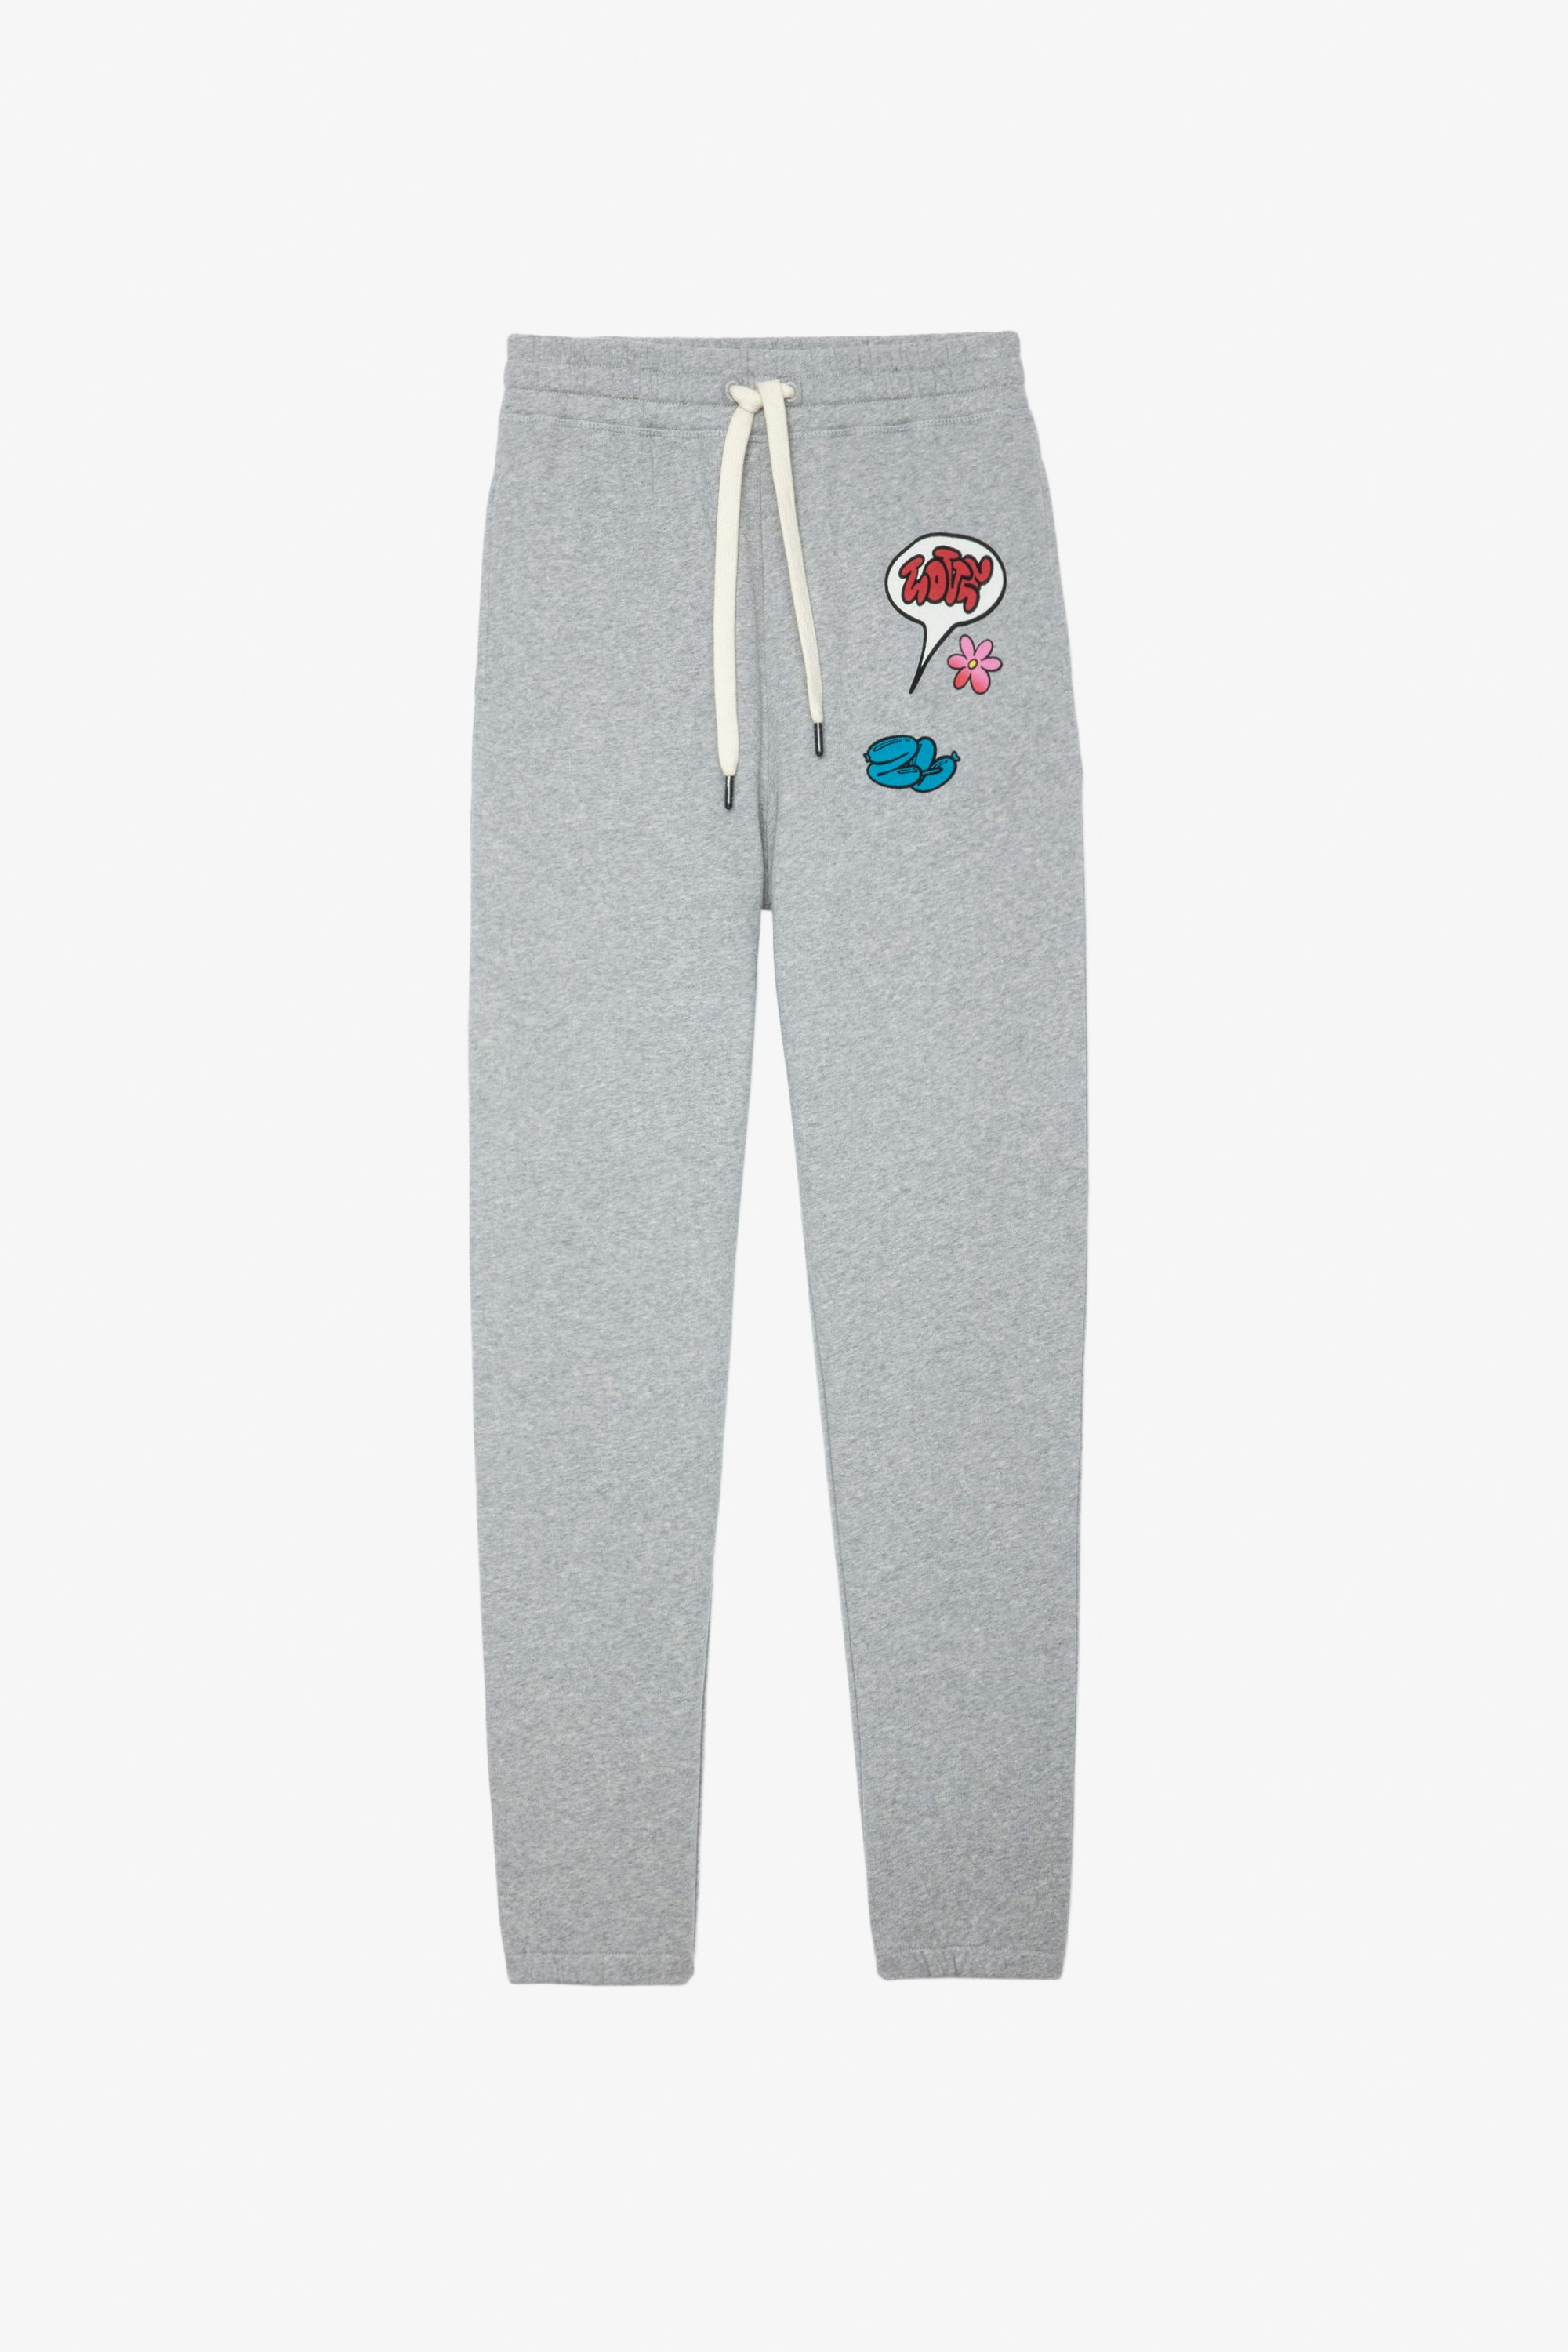 Sofia Trousers Women's grey marl tracksuit bottoms made from cotton with print